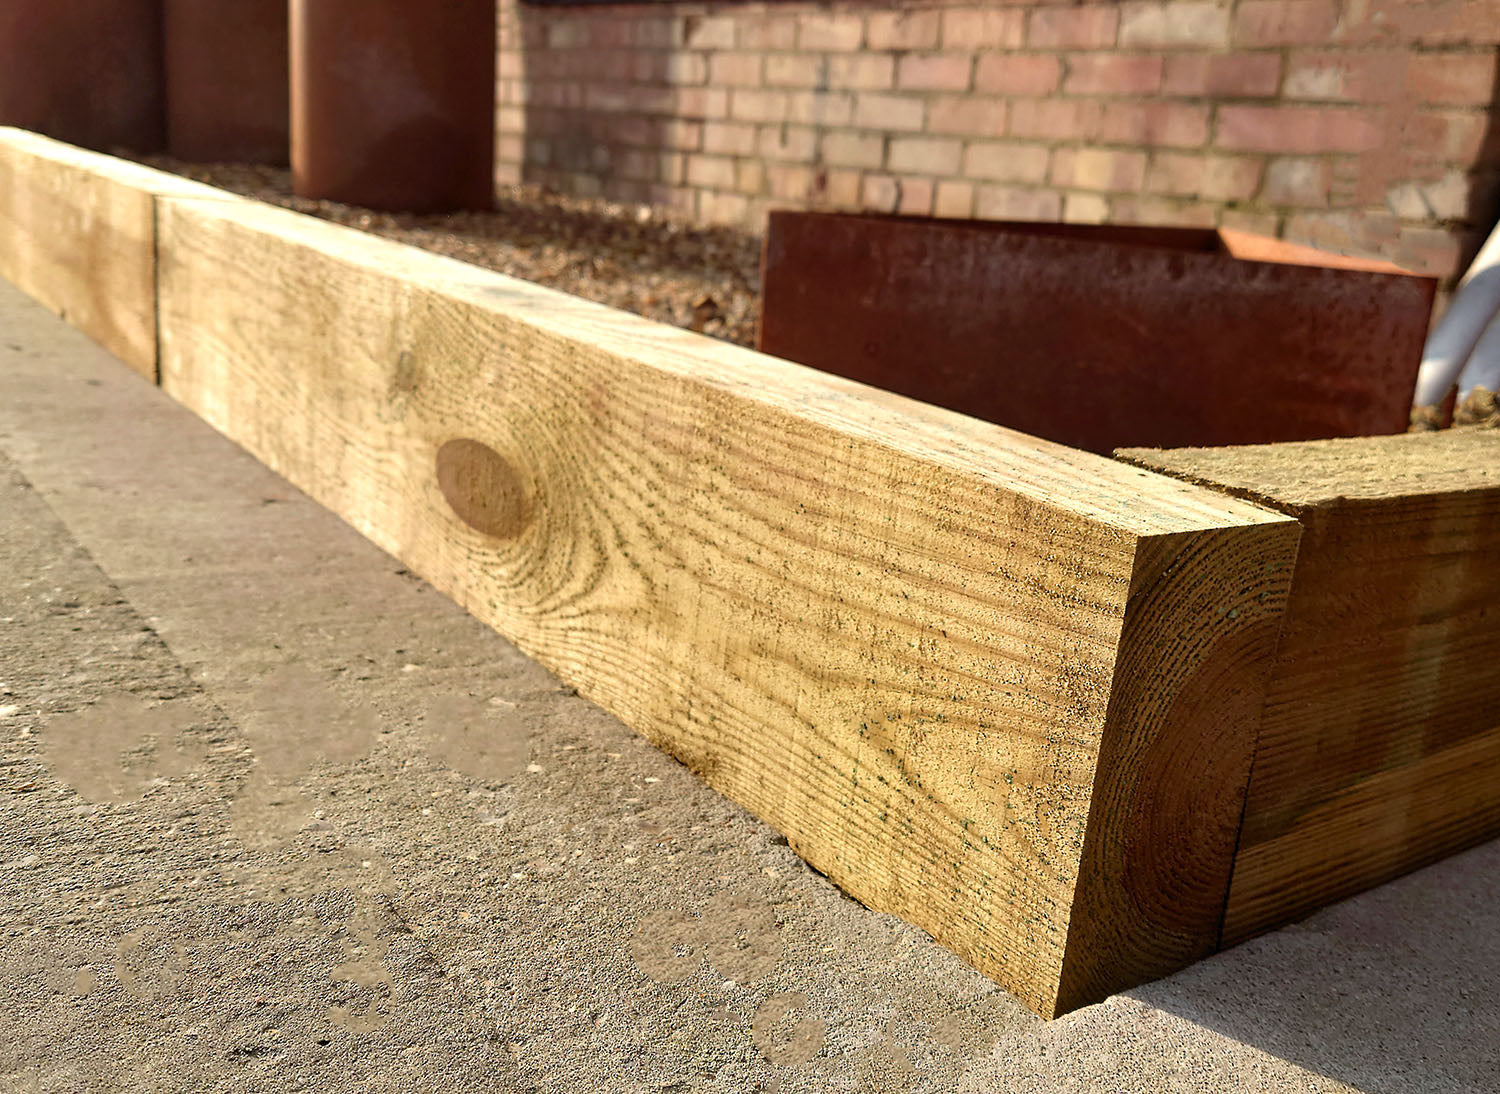 Closeup of the corner joint of 2 Timber Railway Sleepers being used as driveway edging between a concrete surface and stones